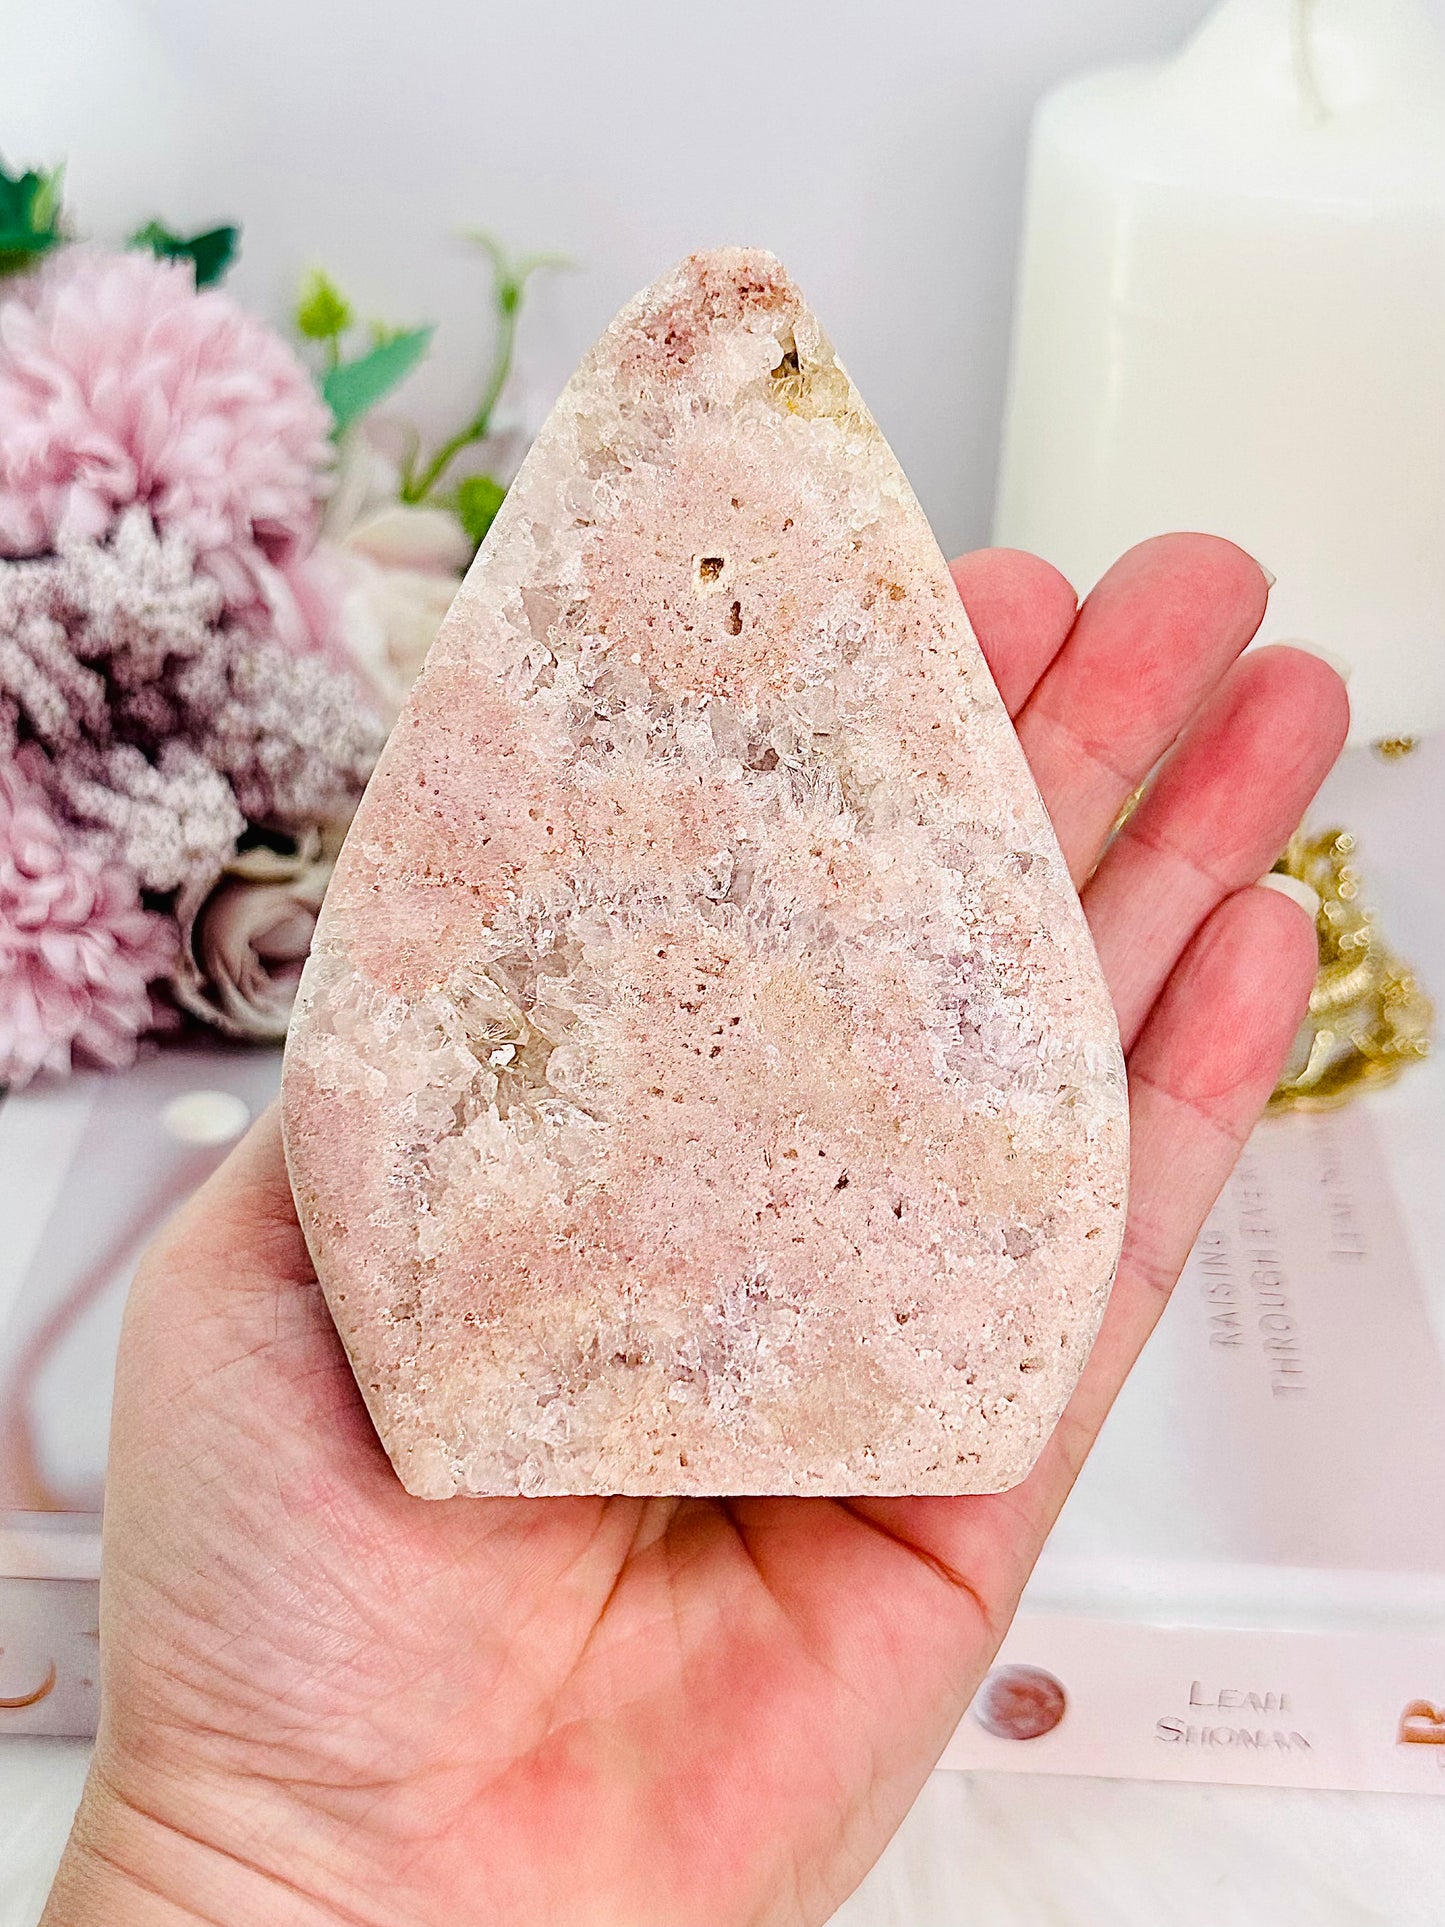 Simply Stunning Large 439gram Druzy Pink Amethyst Carved Flame | Freeform From Brazil